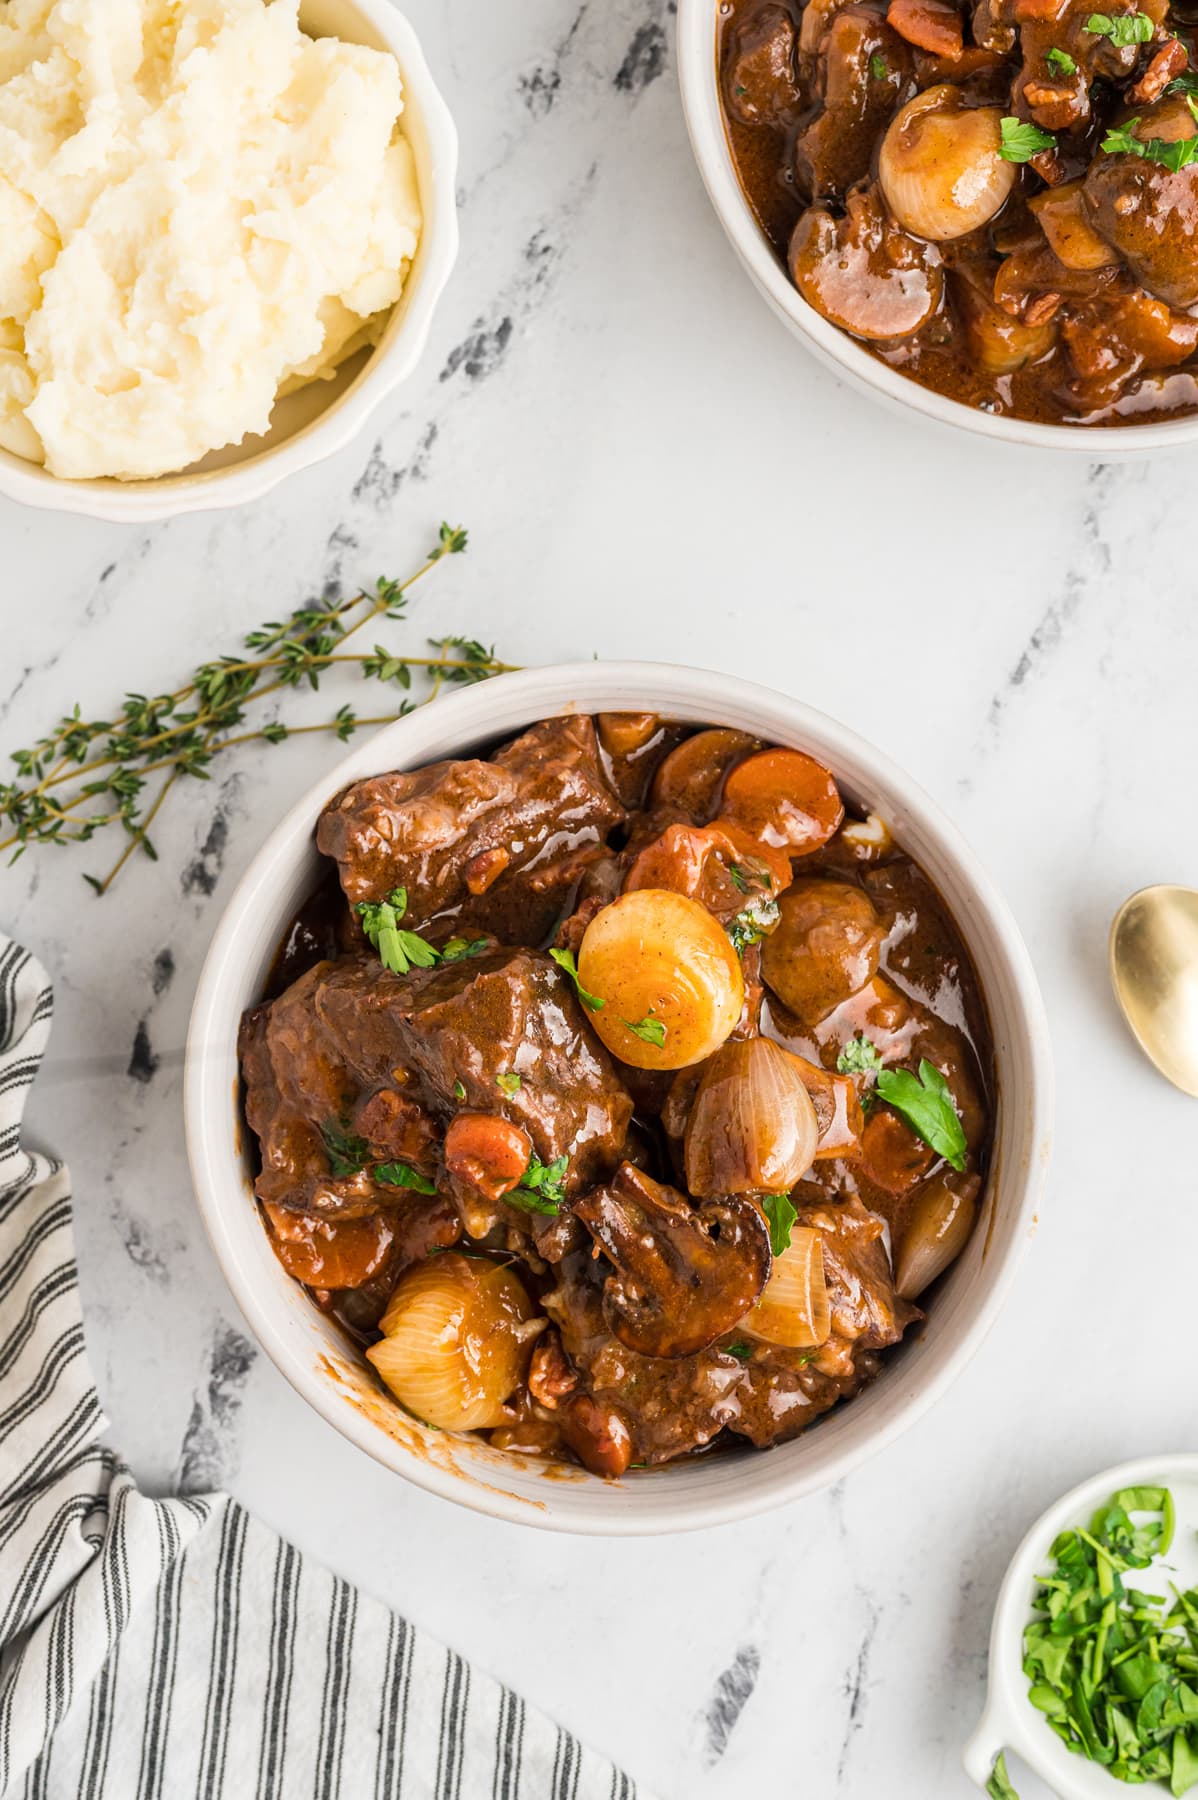 Overhead view of a bowl of Beef Bourguignon